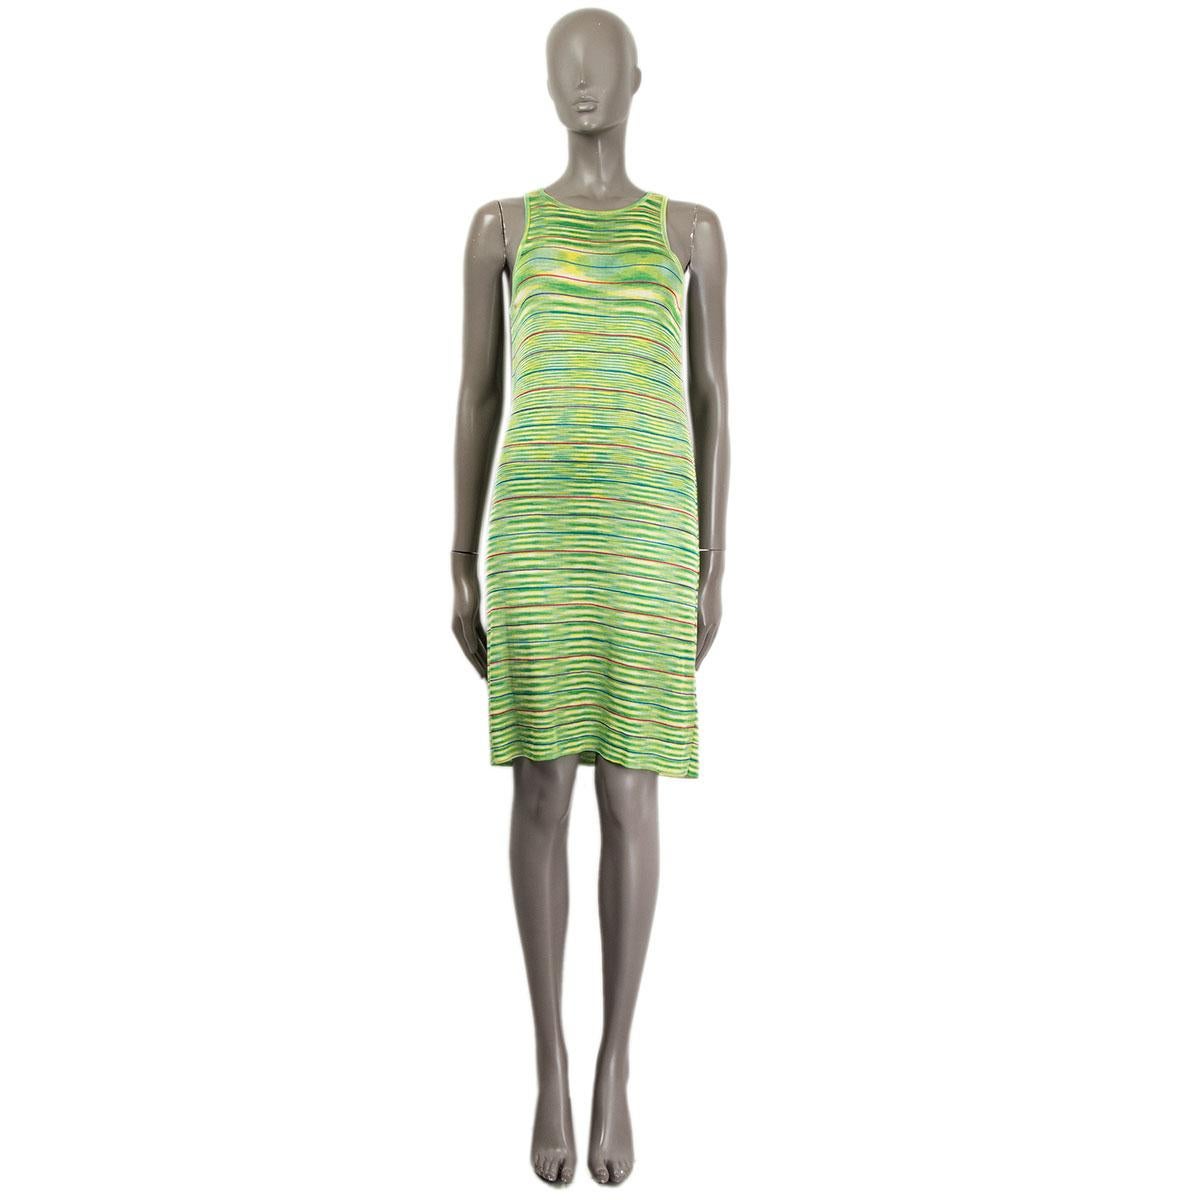 100% authentic Missoni sleeveless shift knit dress in lime green, yellow, pink and purple viscose (100%). Slip-in fit. Unlined. Has been worn and is in excellent condition. Matching cardigan available in separate listing.

Measurements
Tag